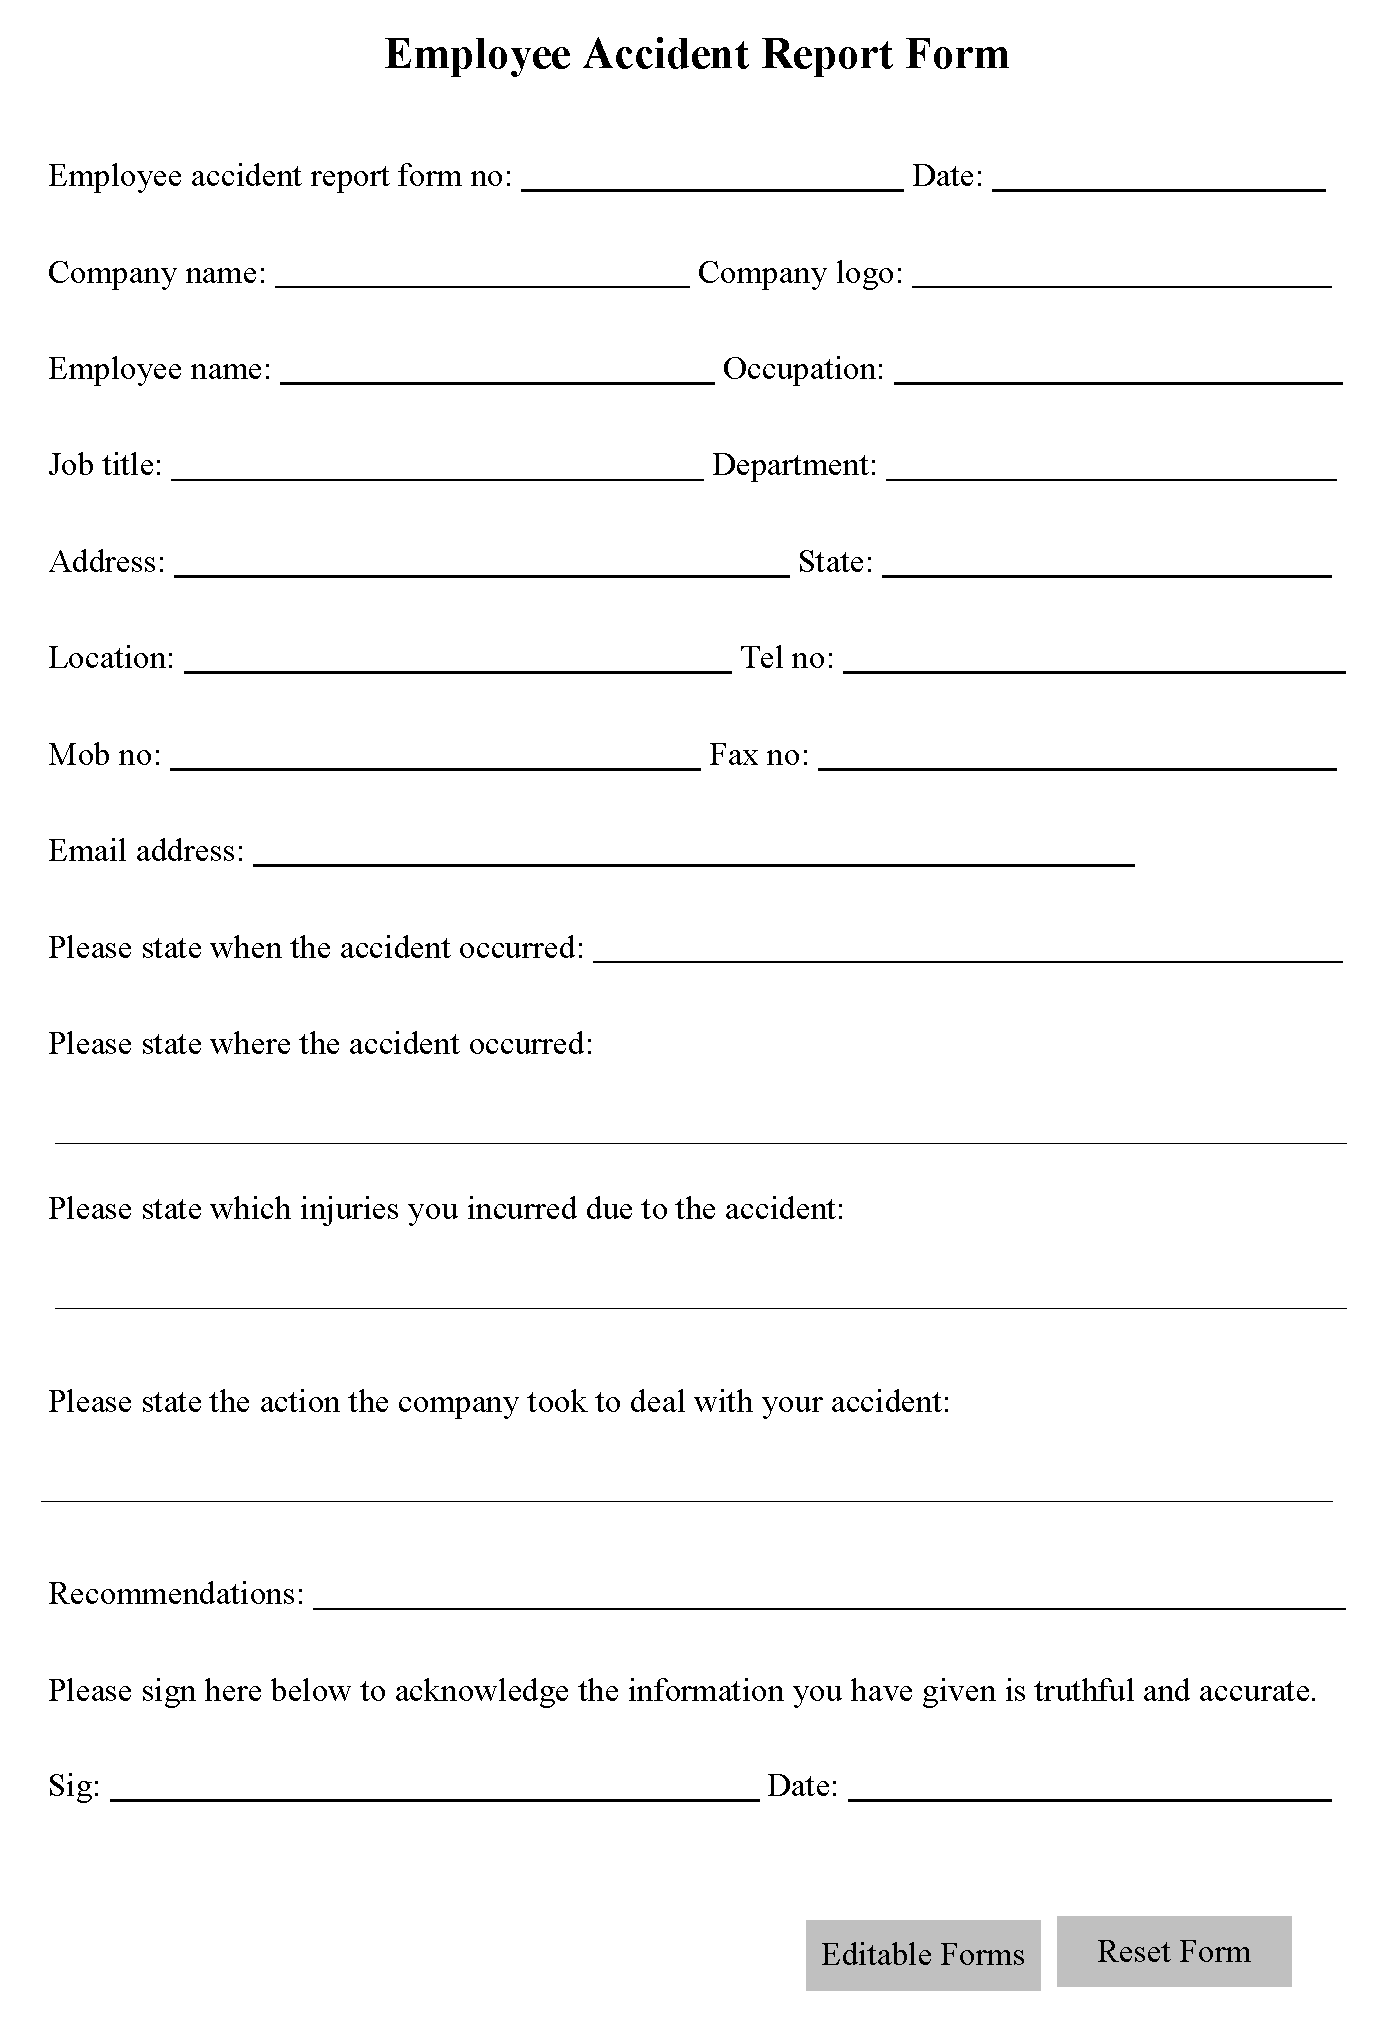 Employee Accident Report Form Editable Forms